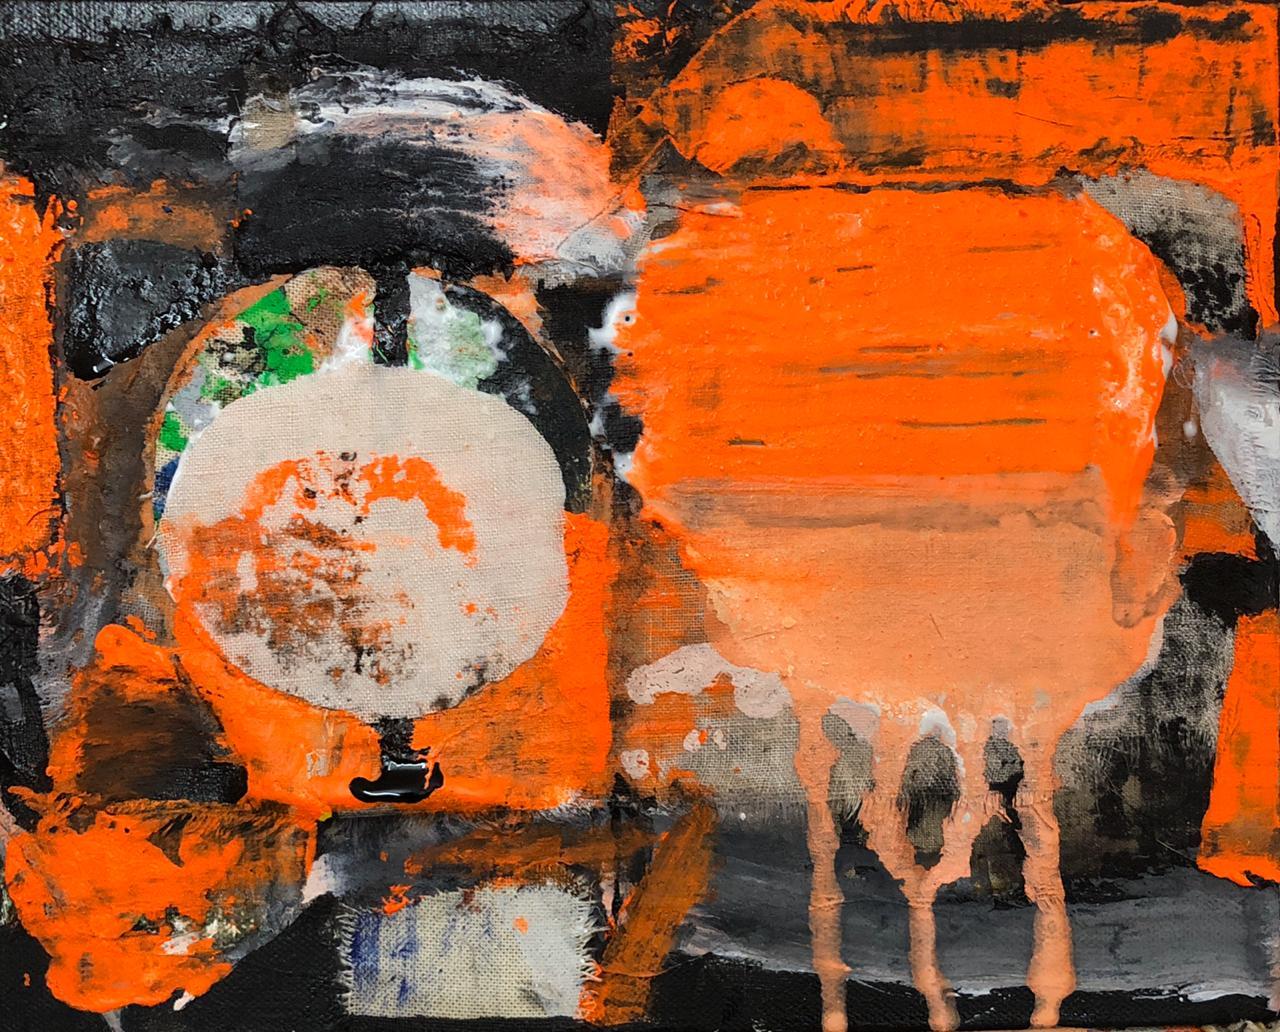  Untitled, Pigment on Canvas, Orange, Black by Contemporary Artist "In Stock"